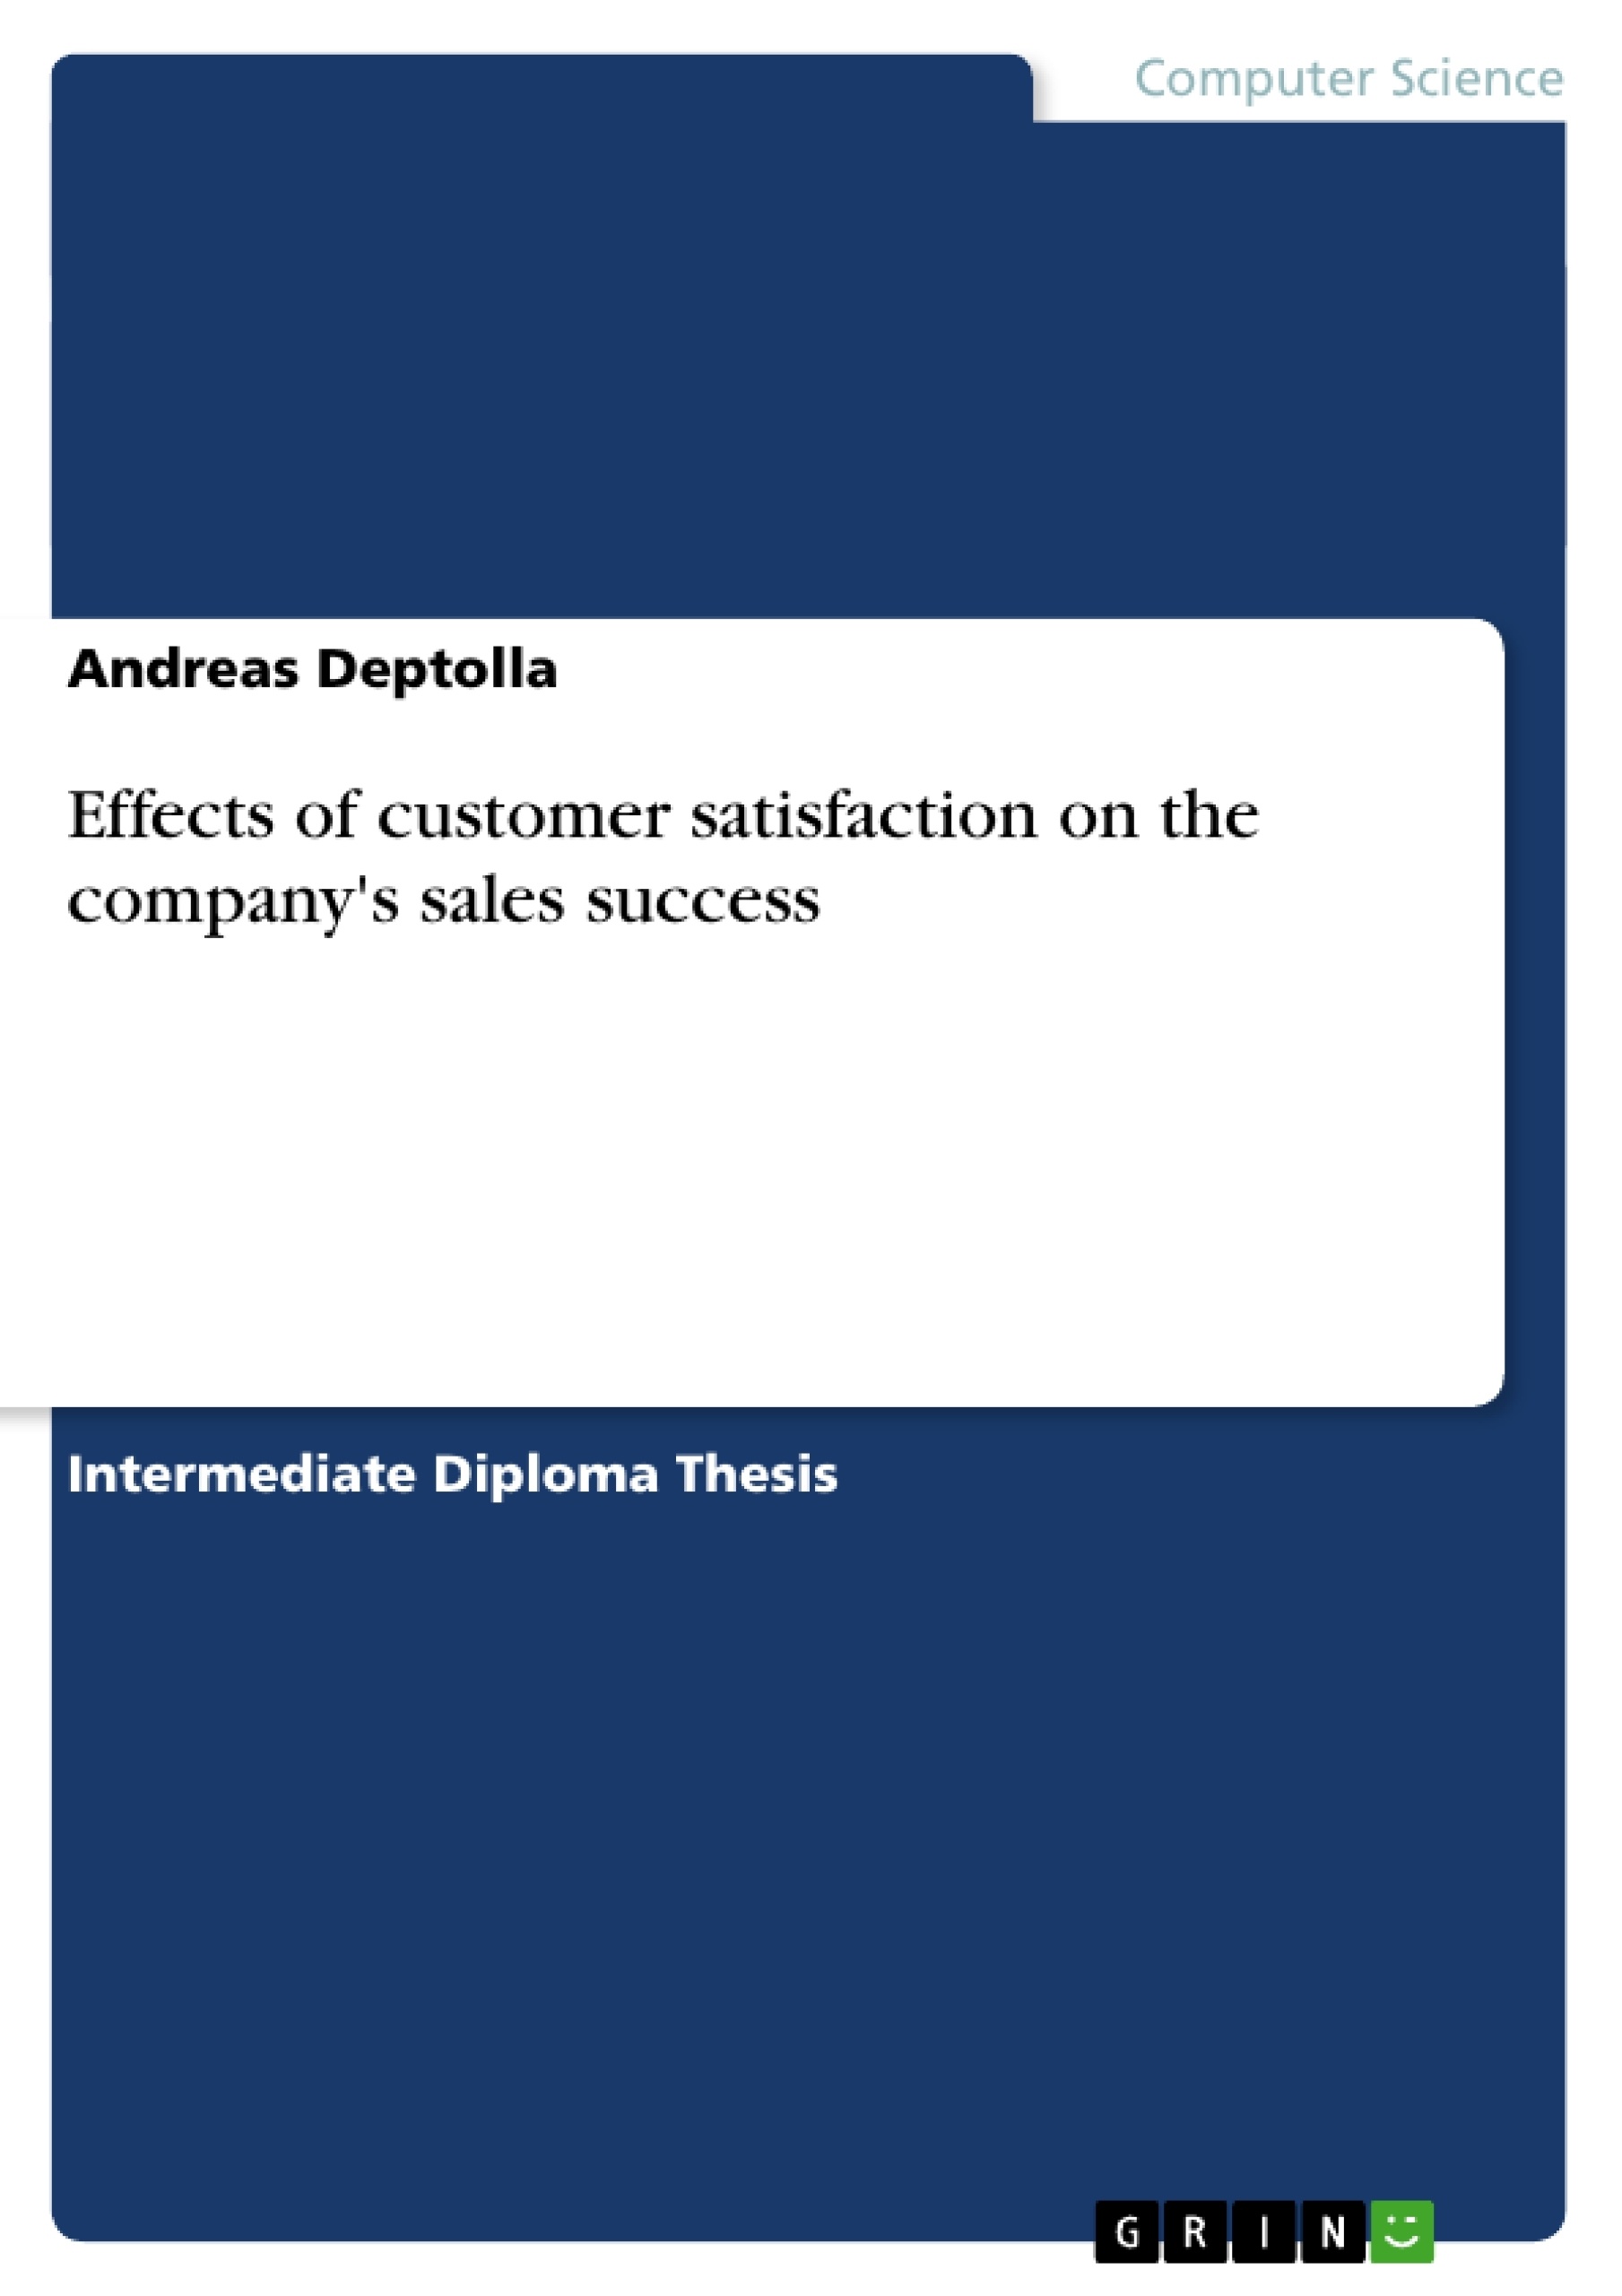 Title: Effects of customer satisfaction on the company's sales success